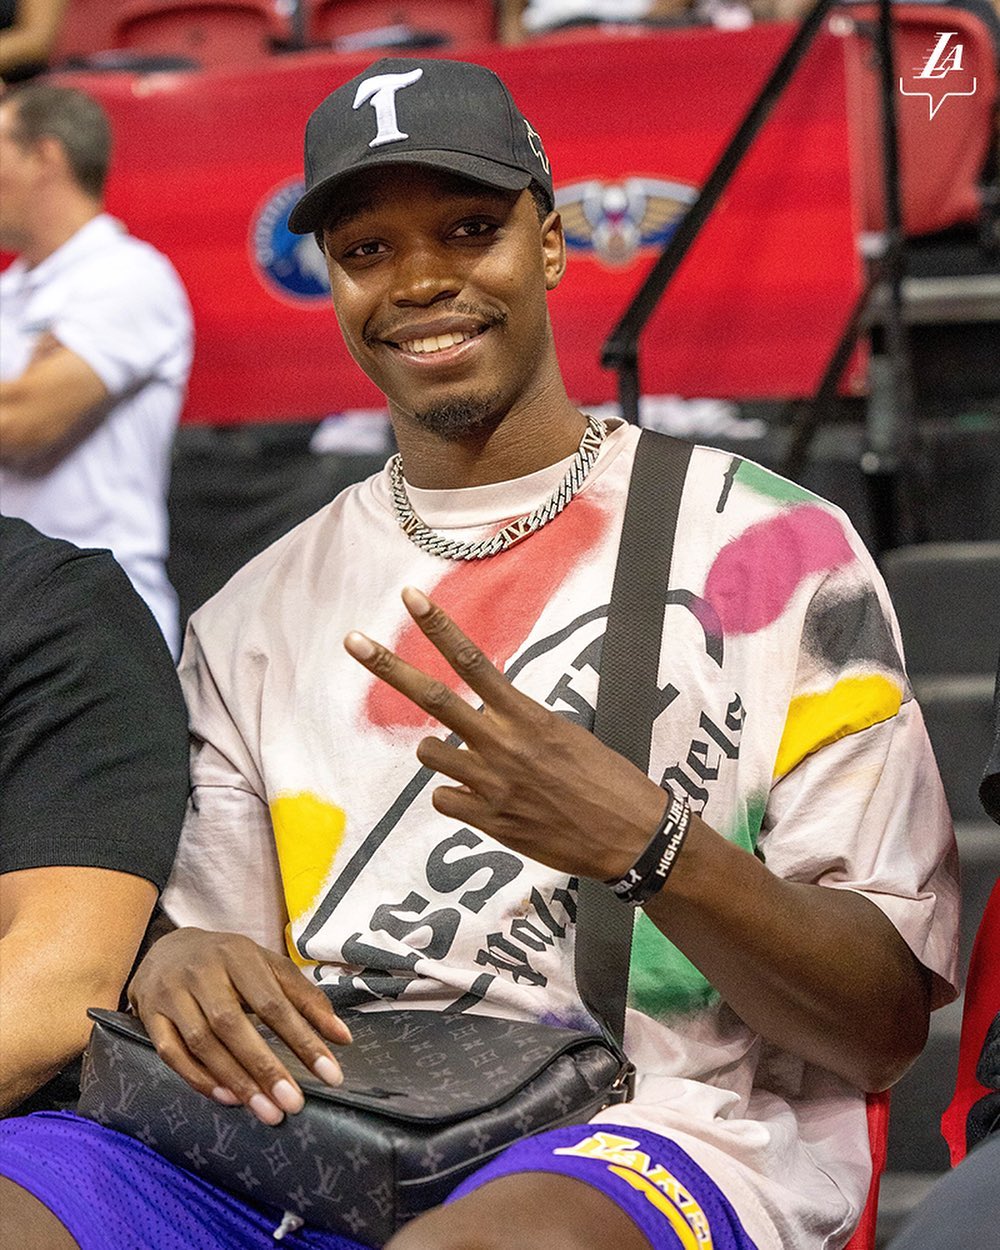 Lonnie courtside in Vegas  #LakersSummer...